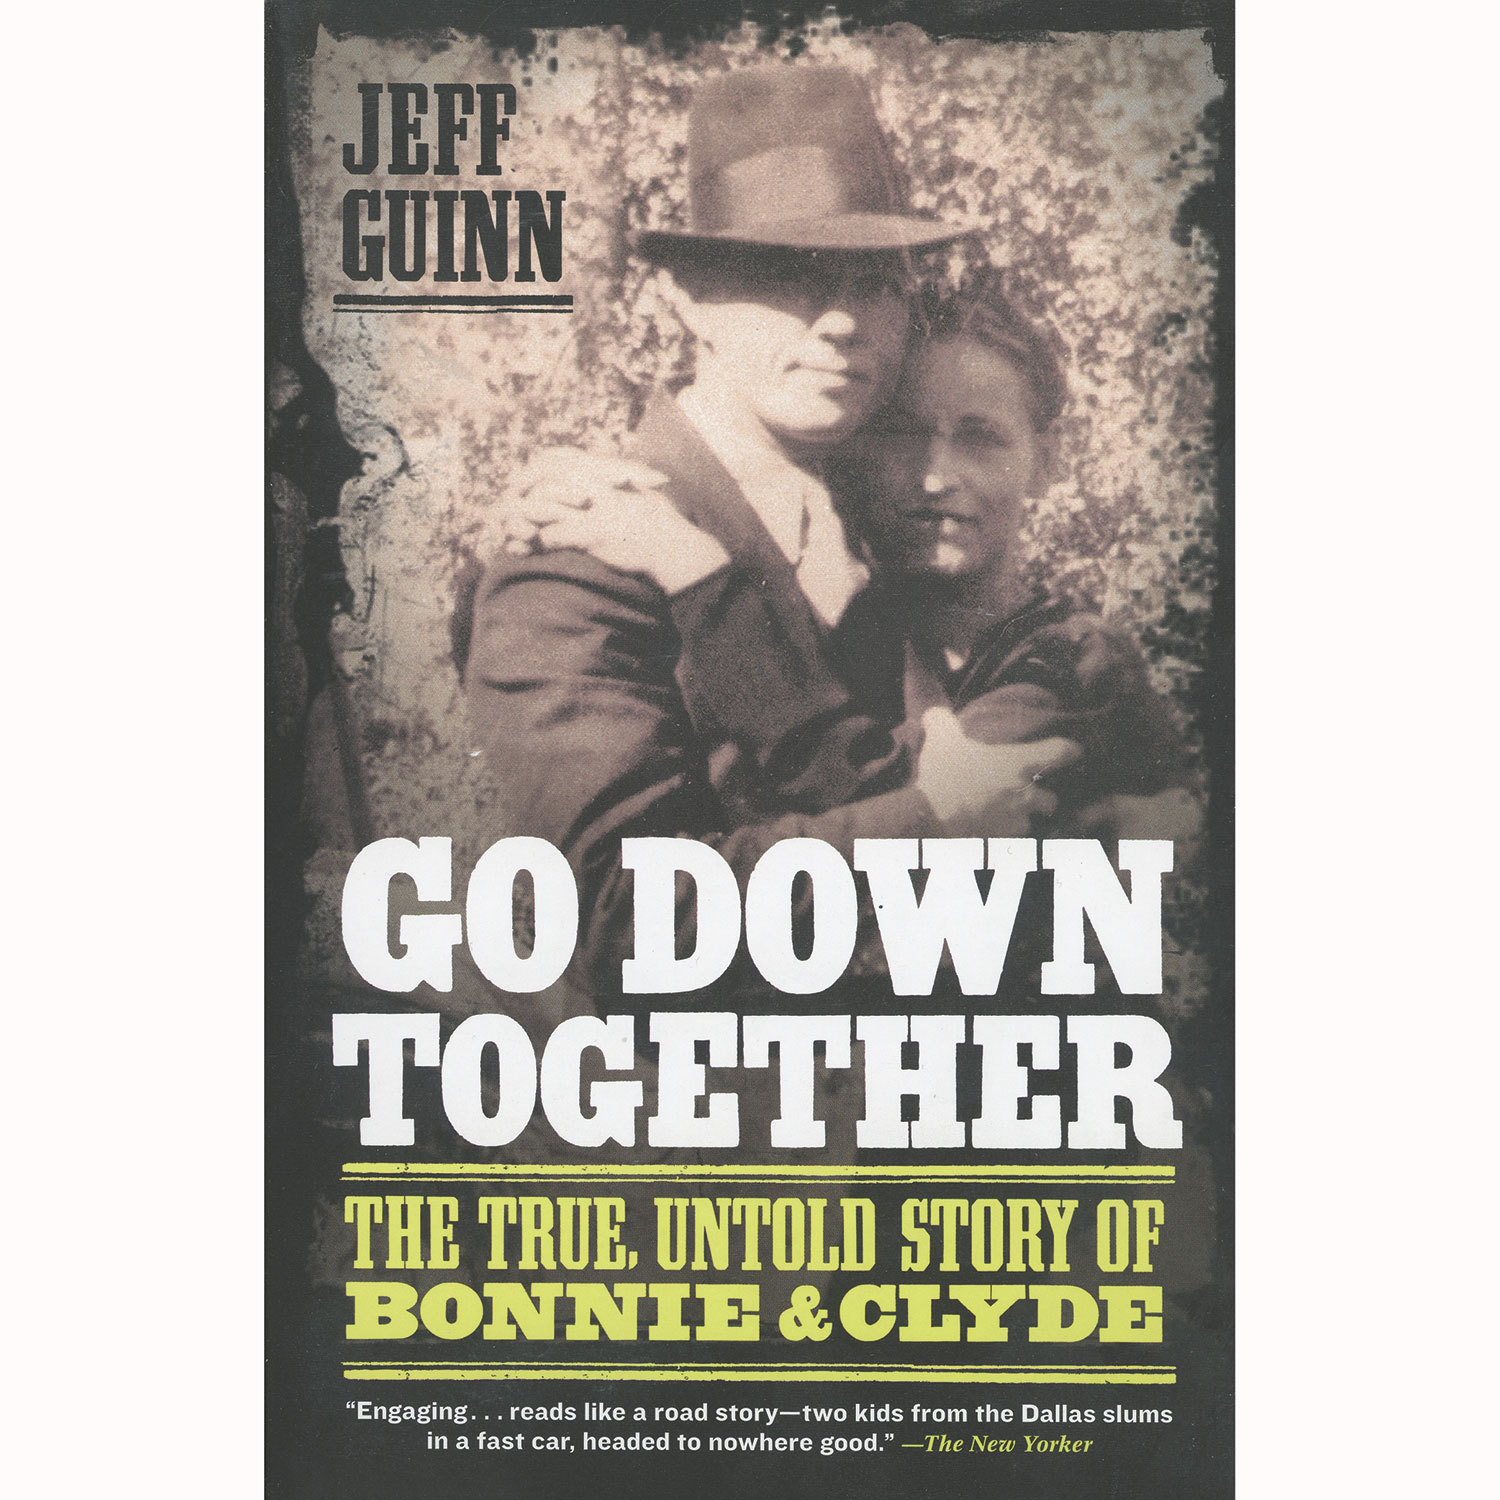 Go Down Together by Jeff Guinn